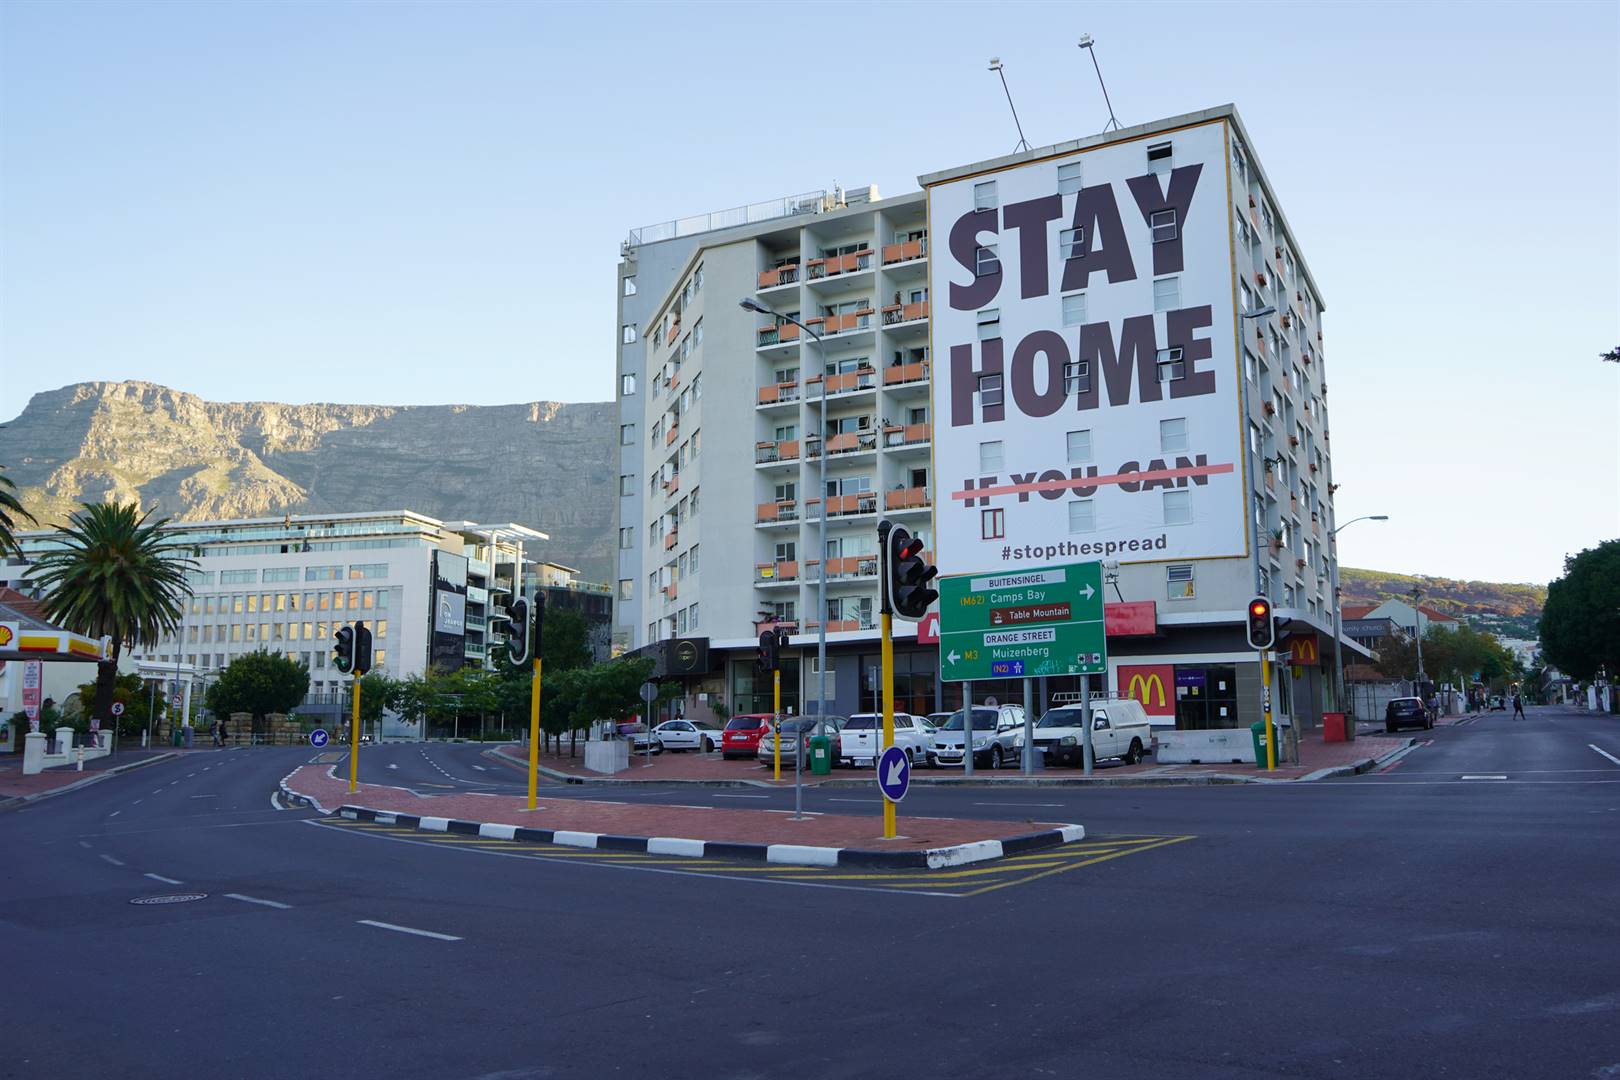 Empty streets in the City of Cape Town during the lockdown for Covid-19. Photo: iStock